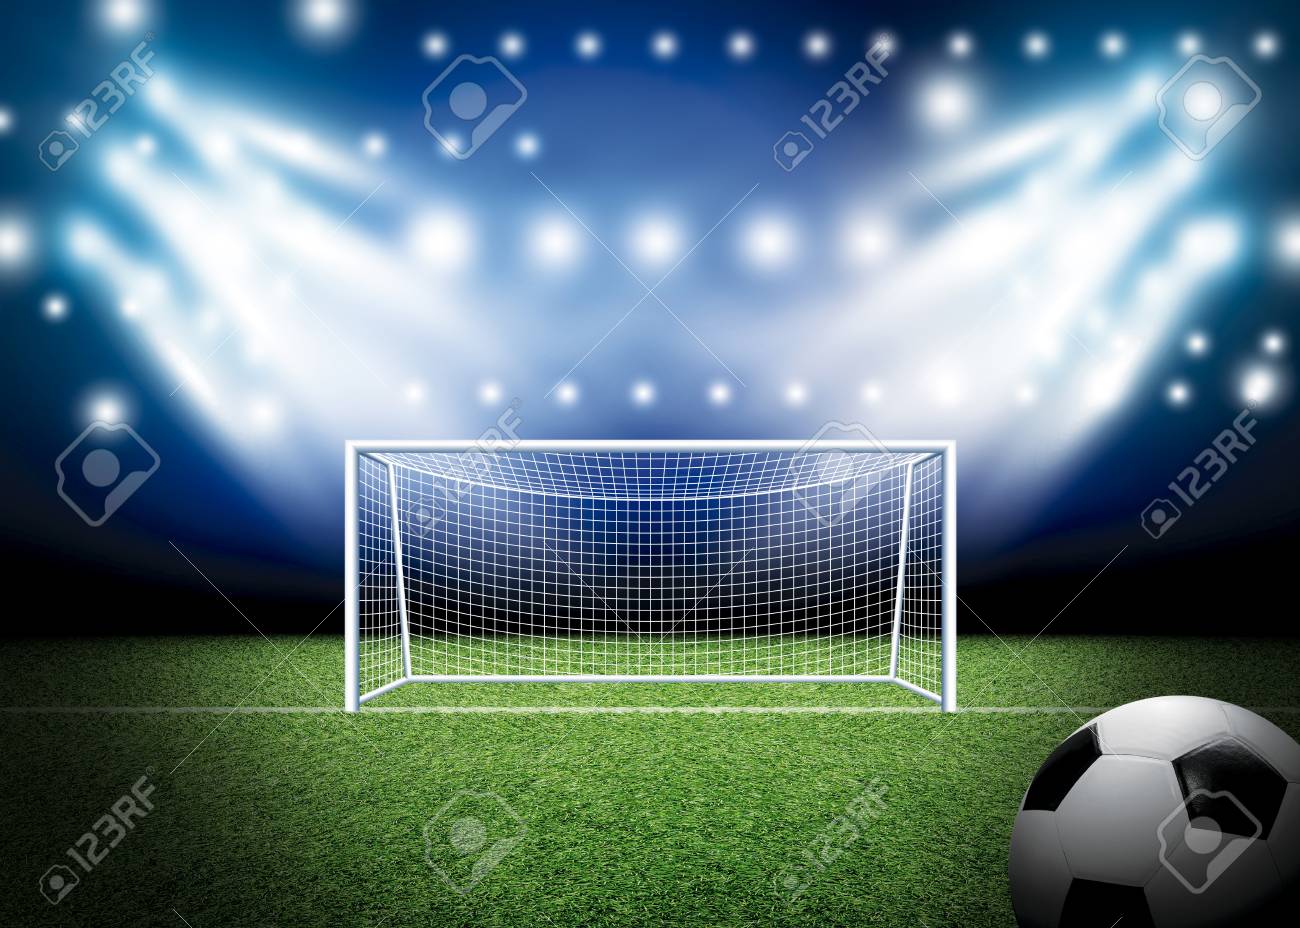 Soccer Goal And Football With Spotlight Background In Stadium